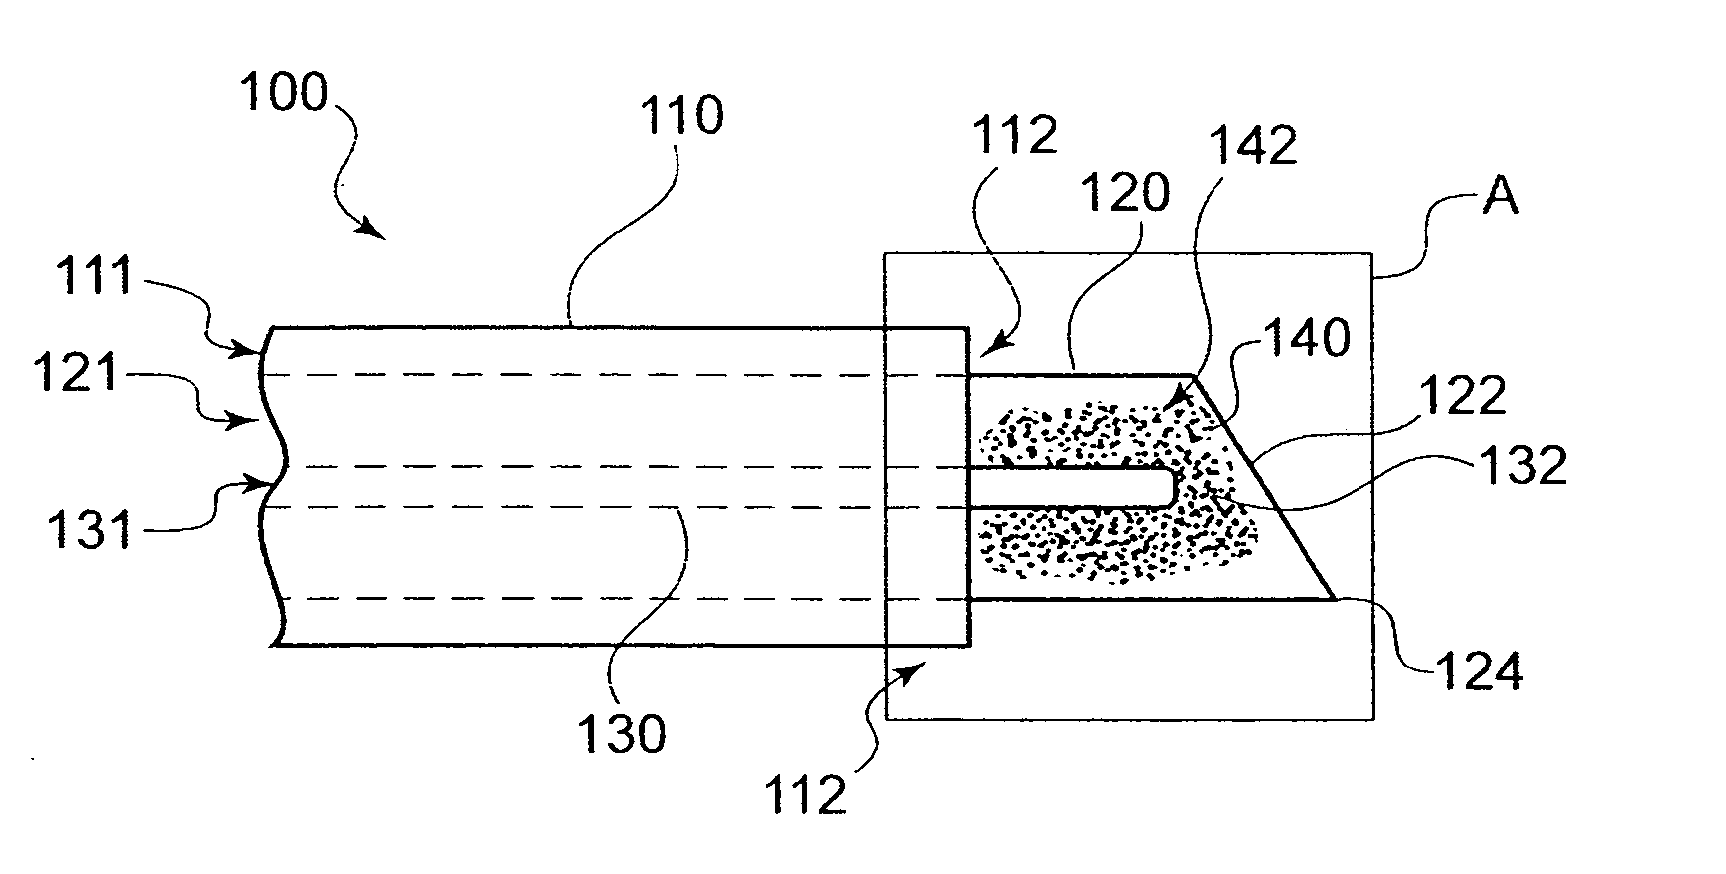 Multiple needle injection catheter and method of use of same